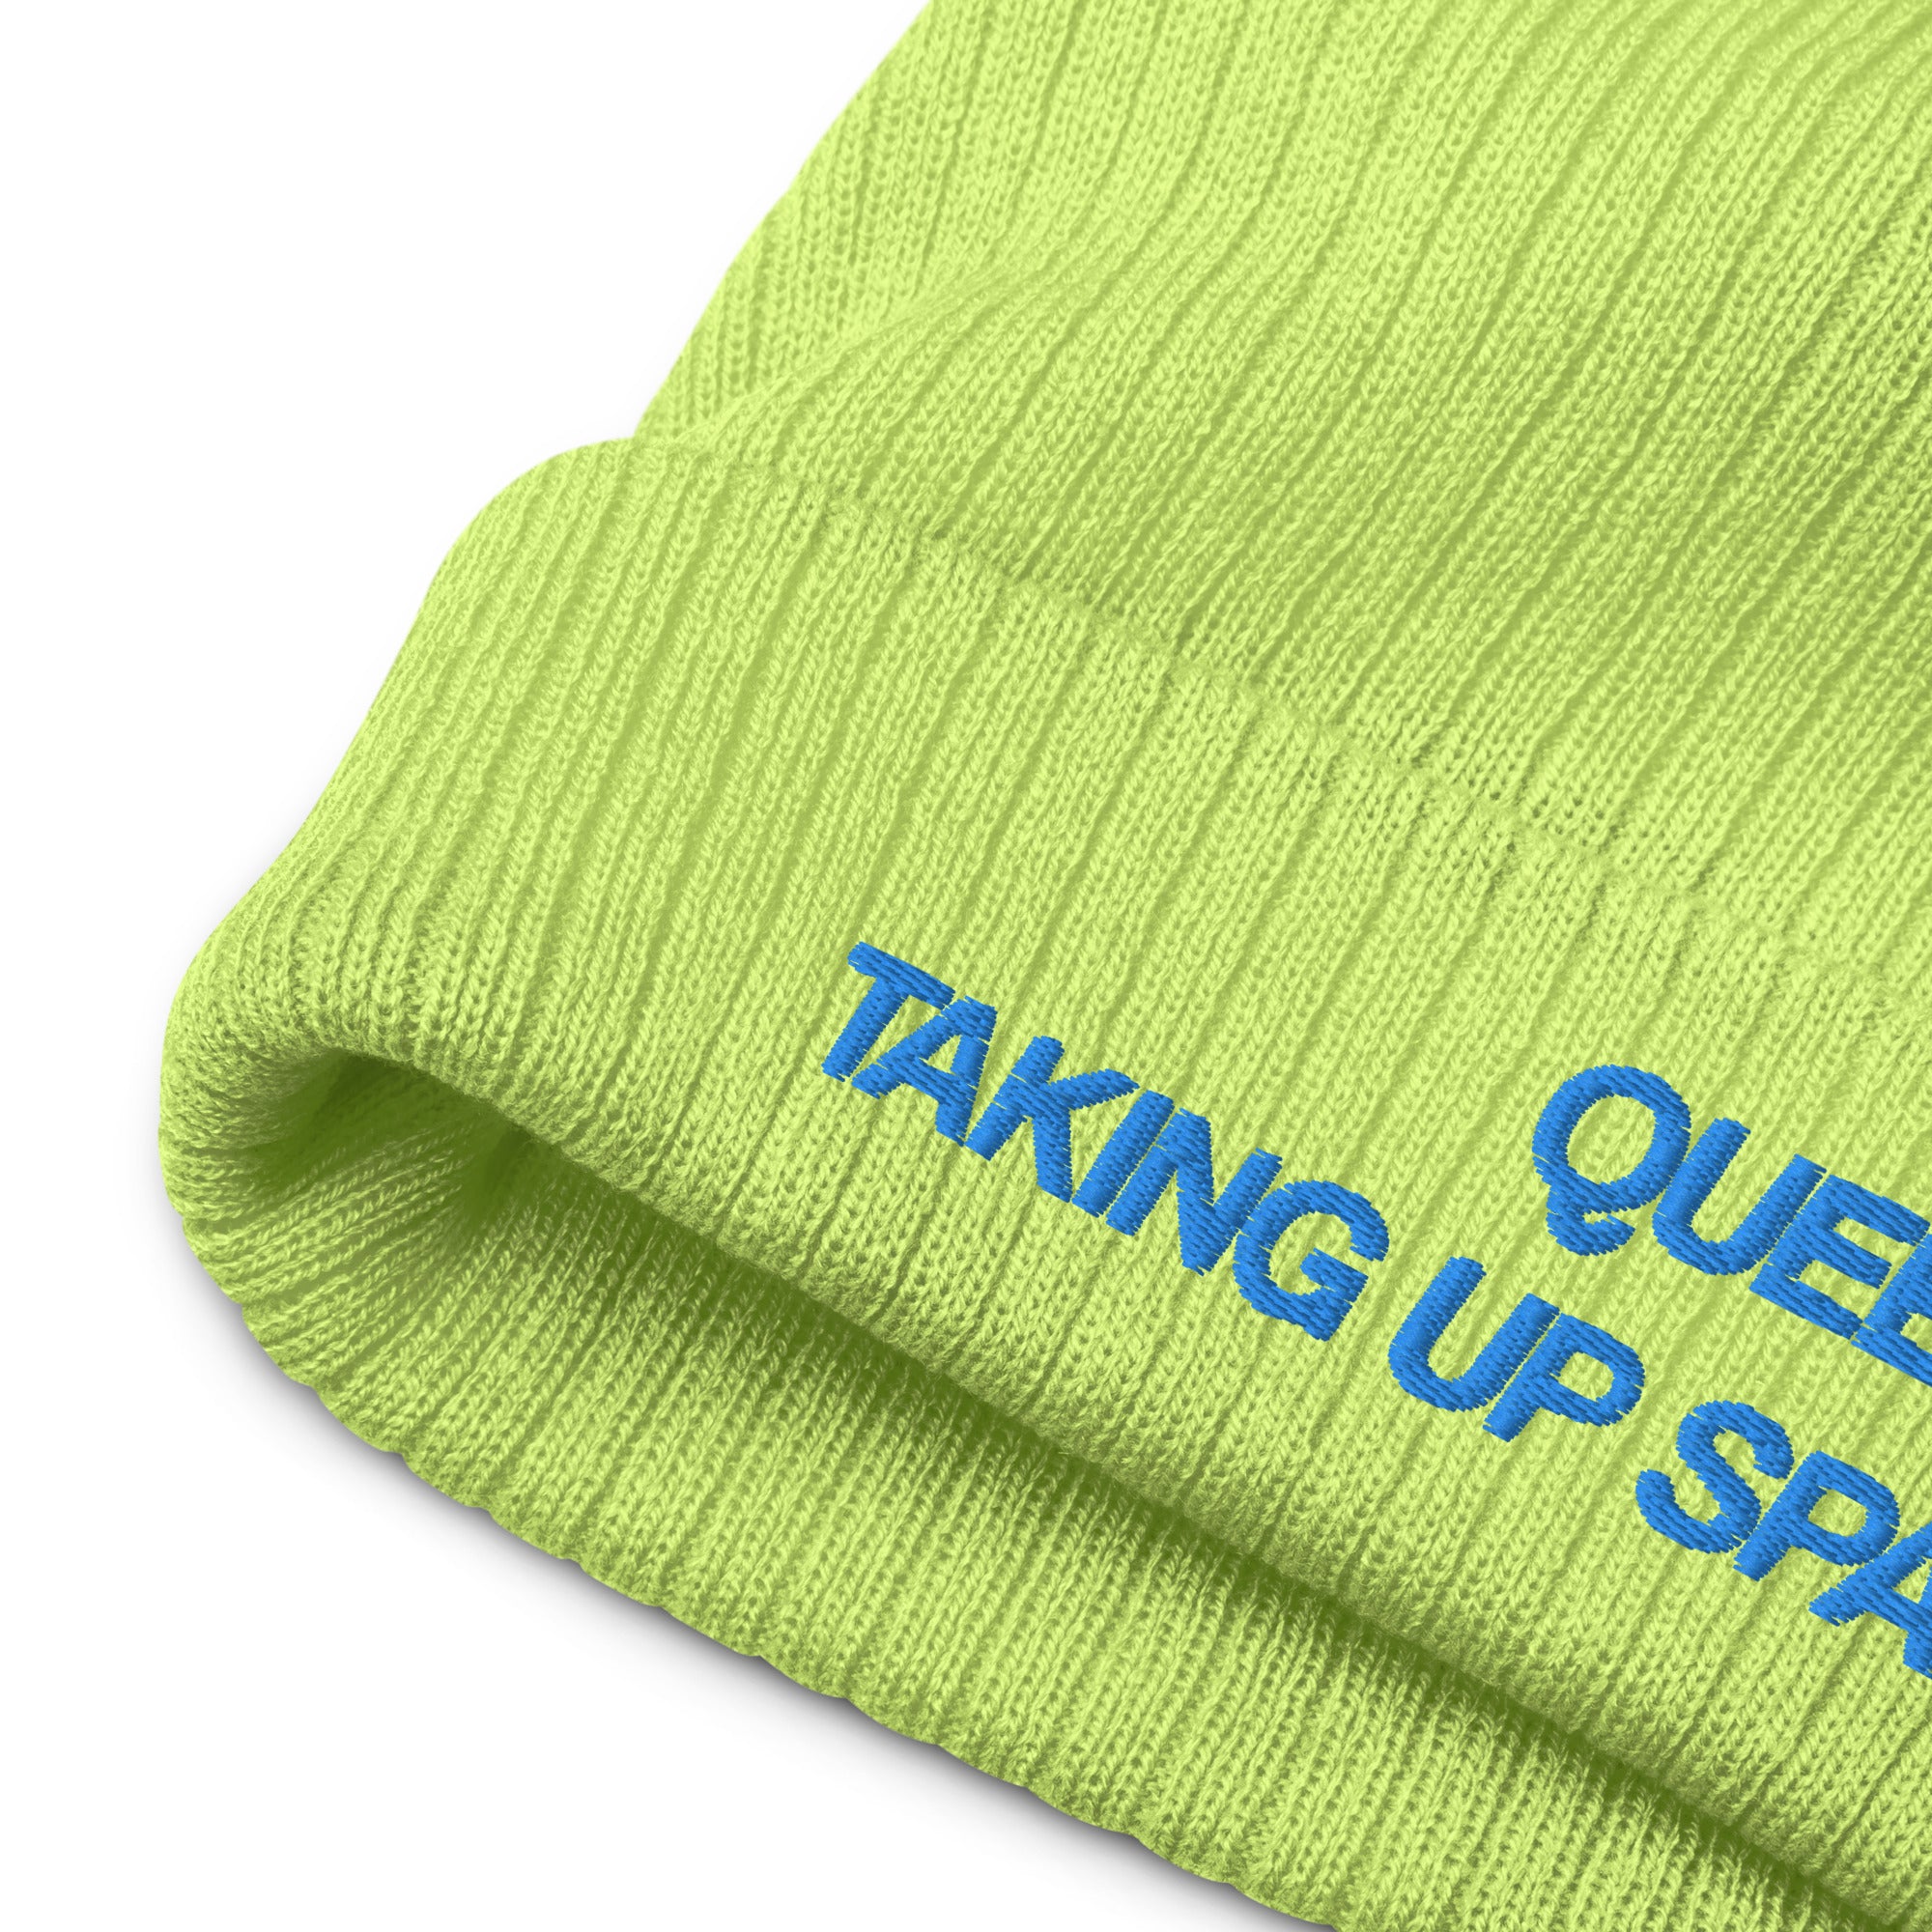 Queer & Taking Up Space Ribbed Knit Beanie